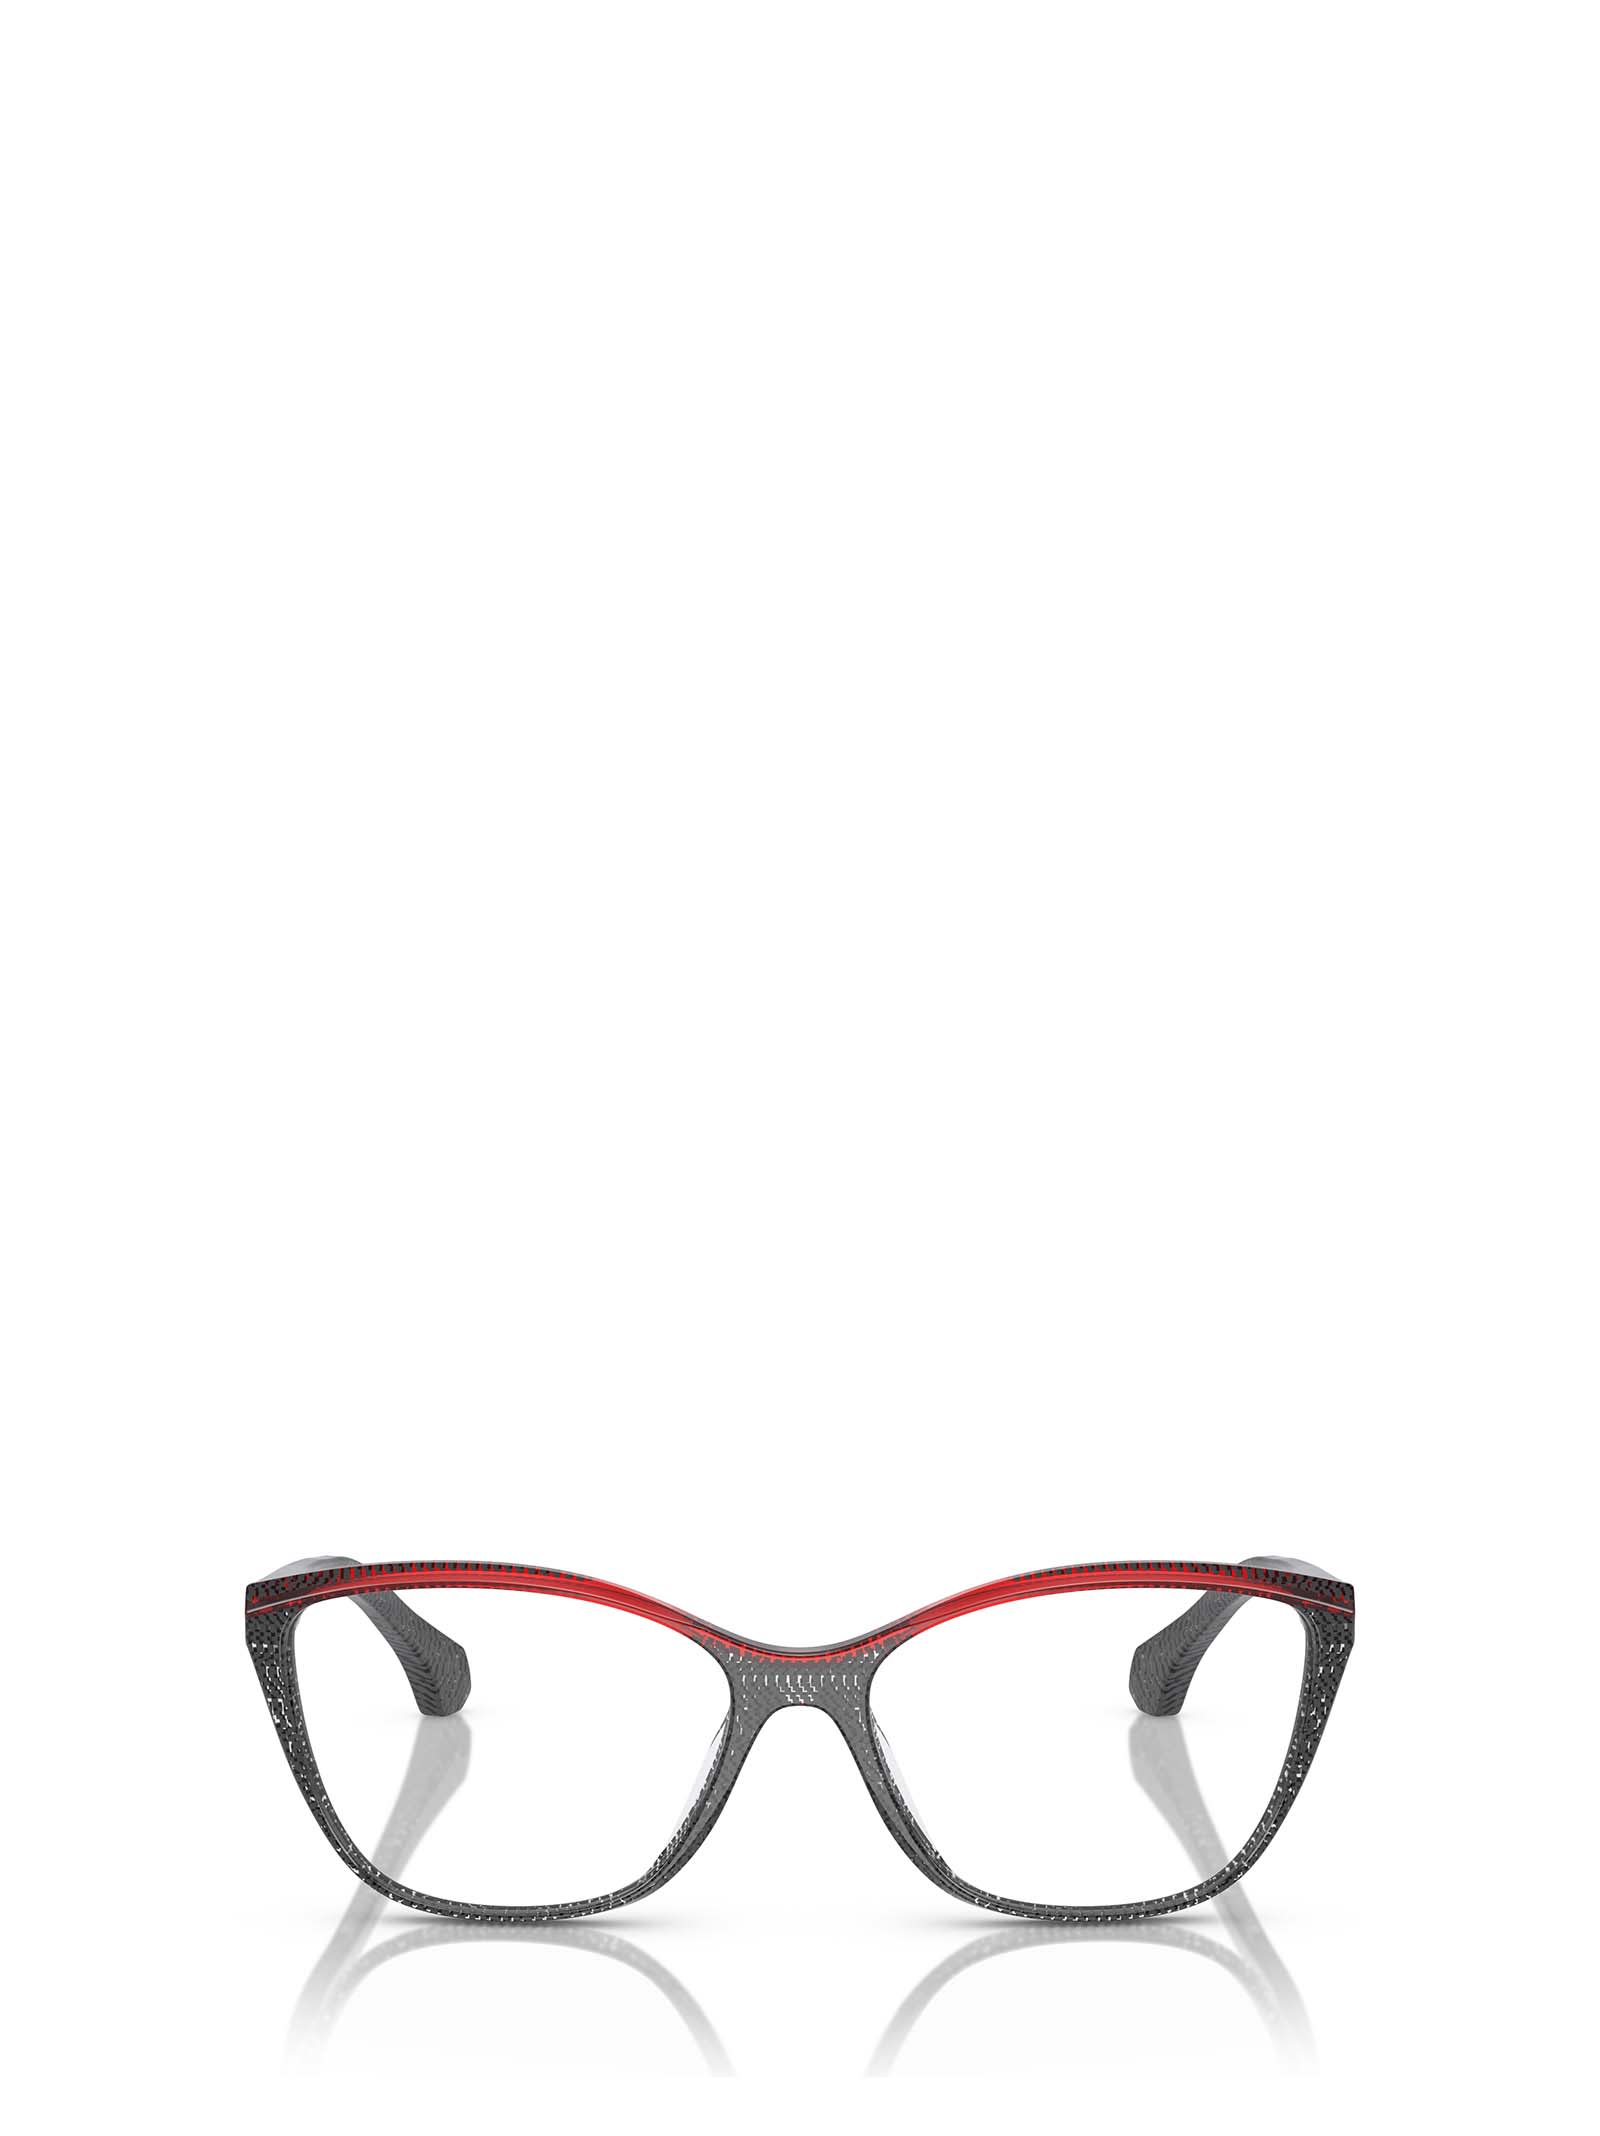 A03502 New Pointillee Grey/red Glasses